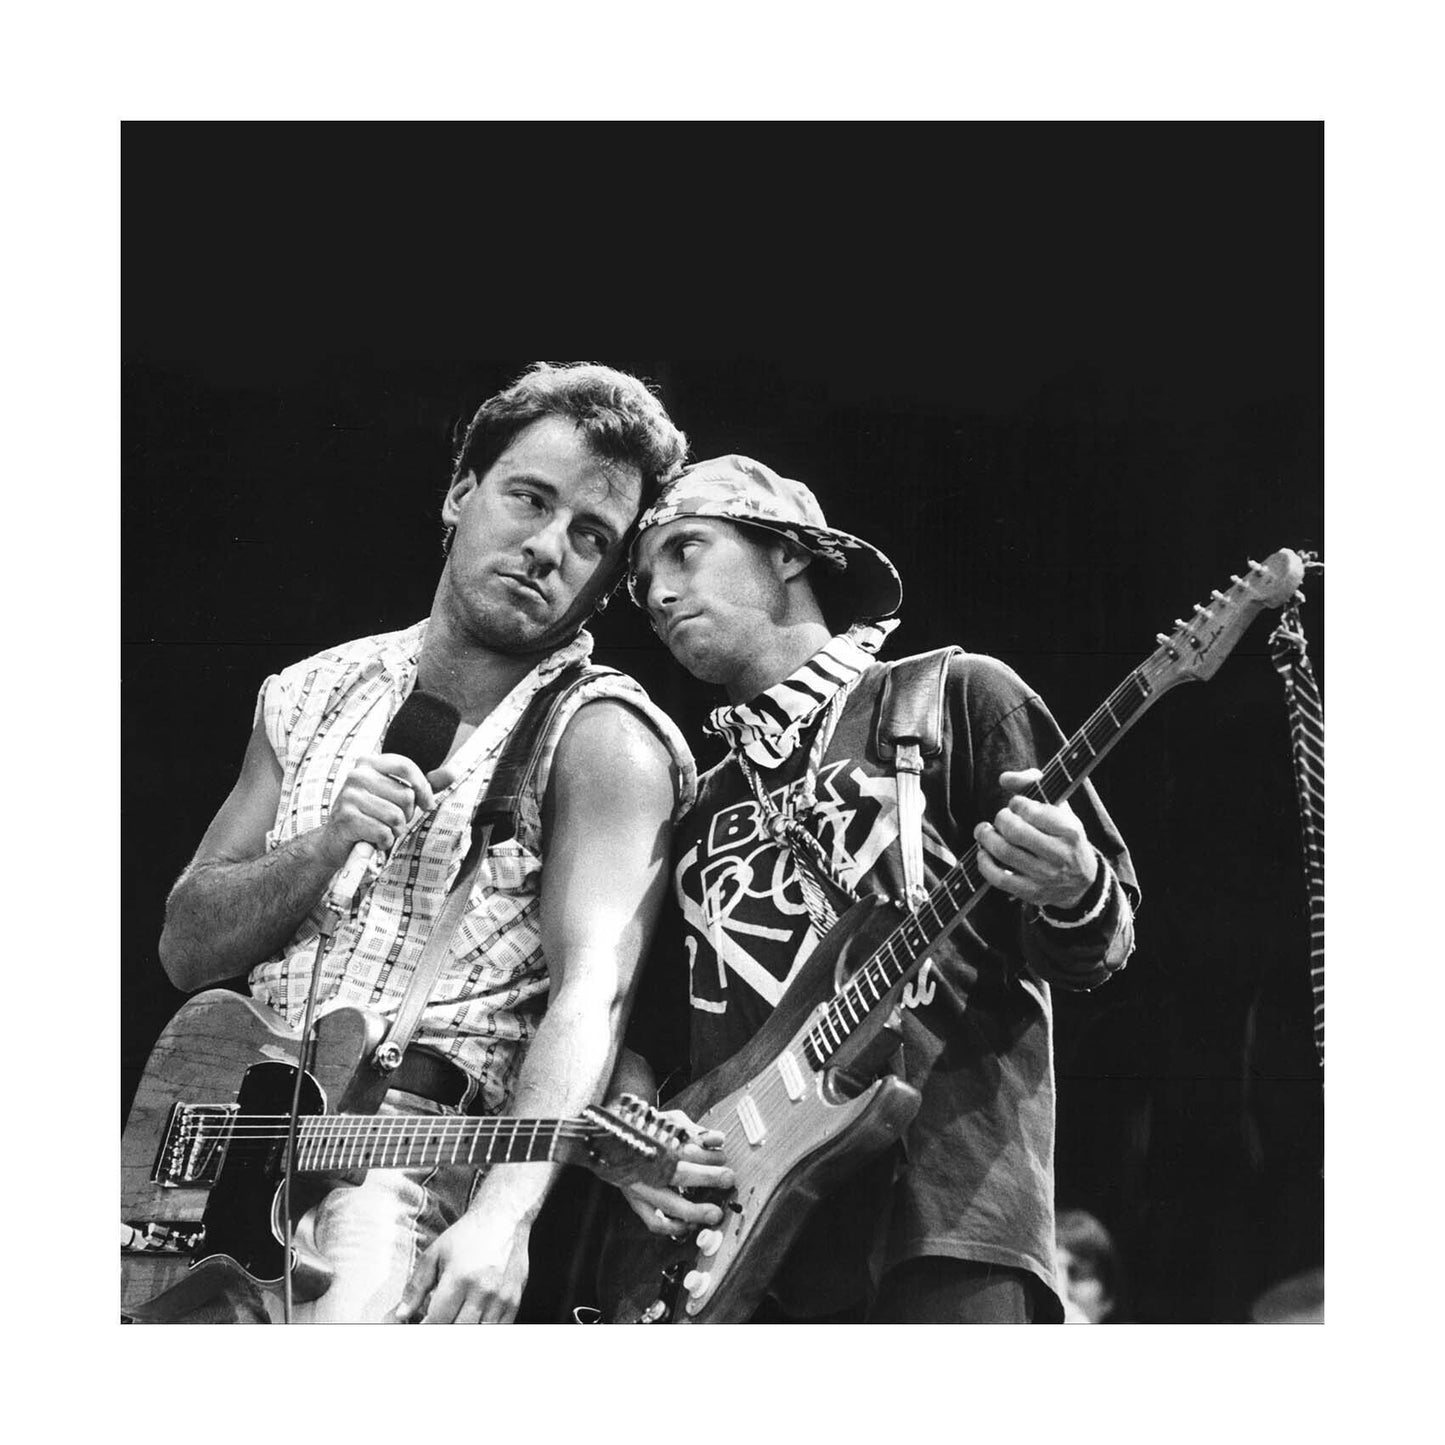 Bruce Springsteen - On Stage with Nils Lofgren, England, 1985 Print